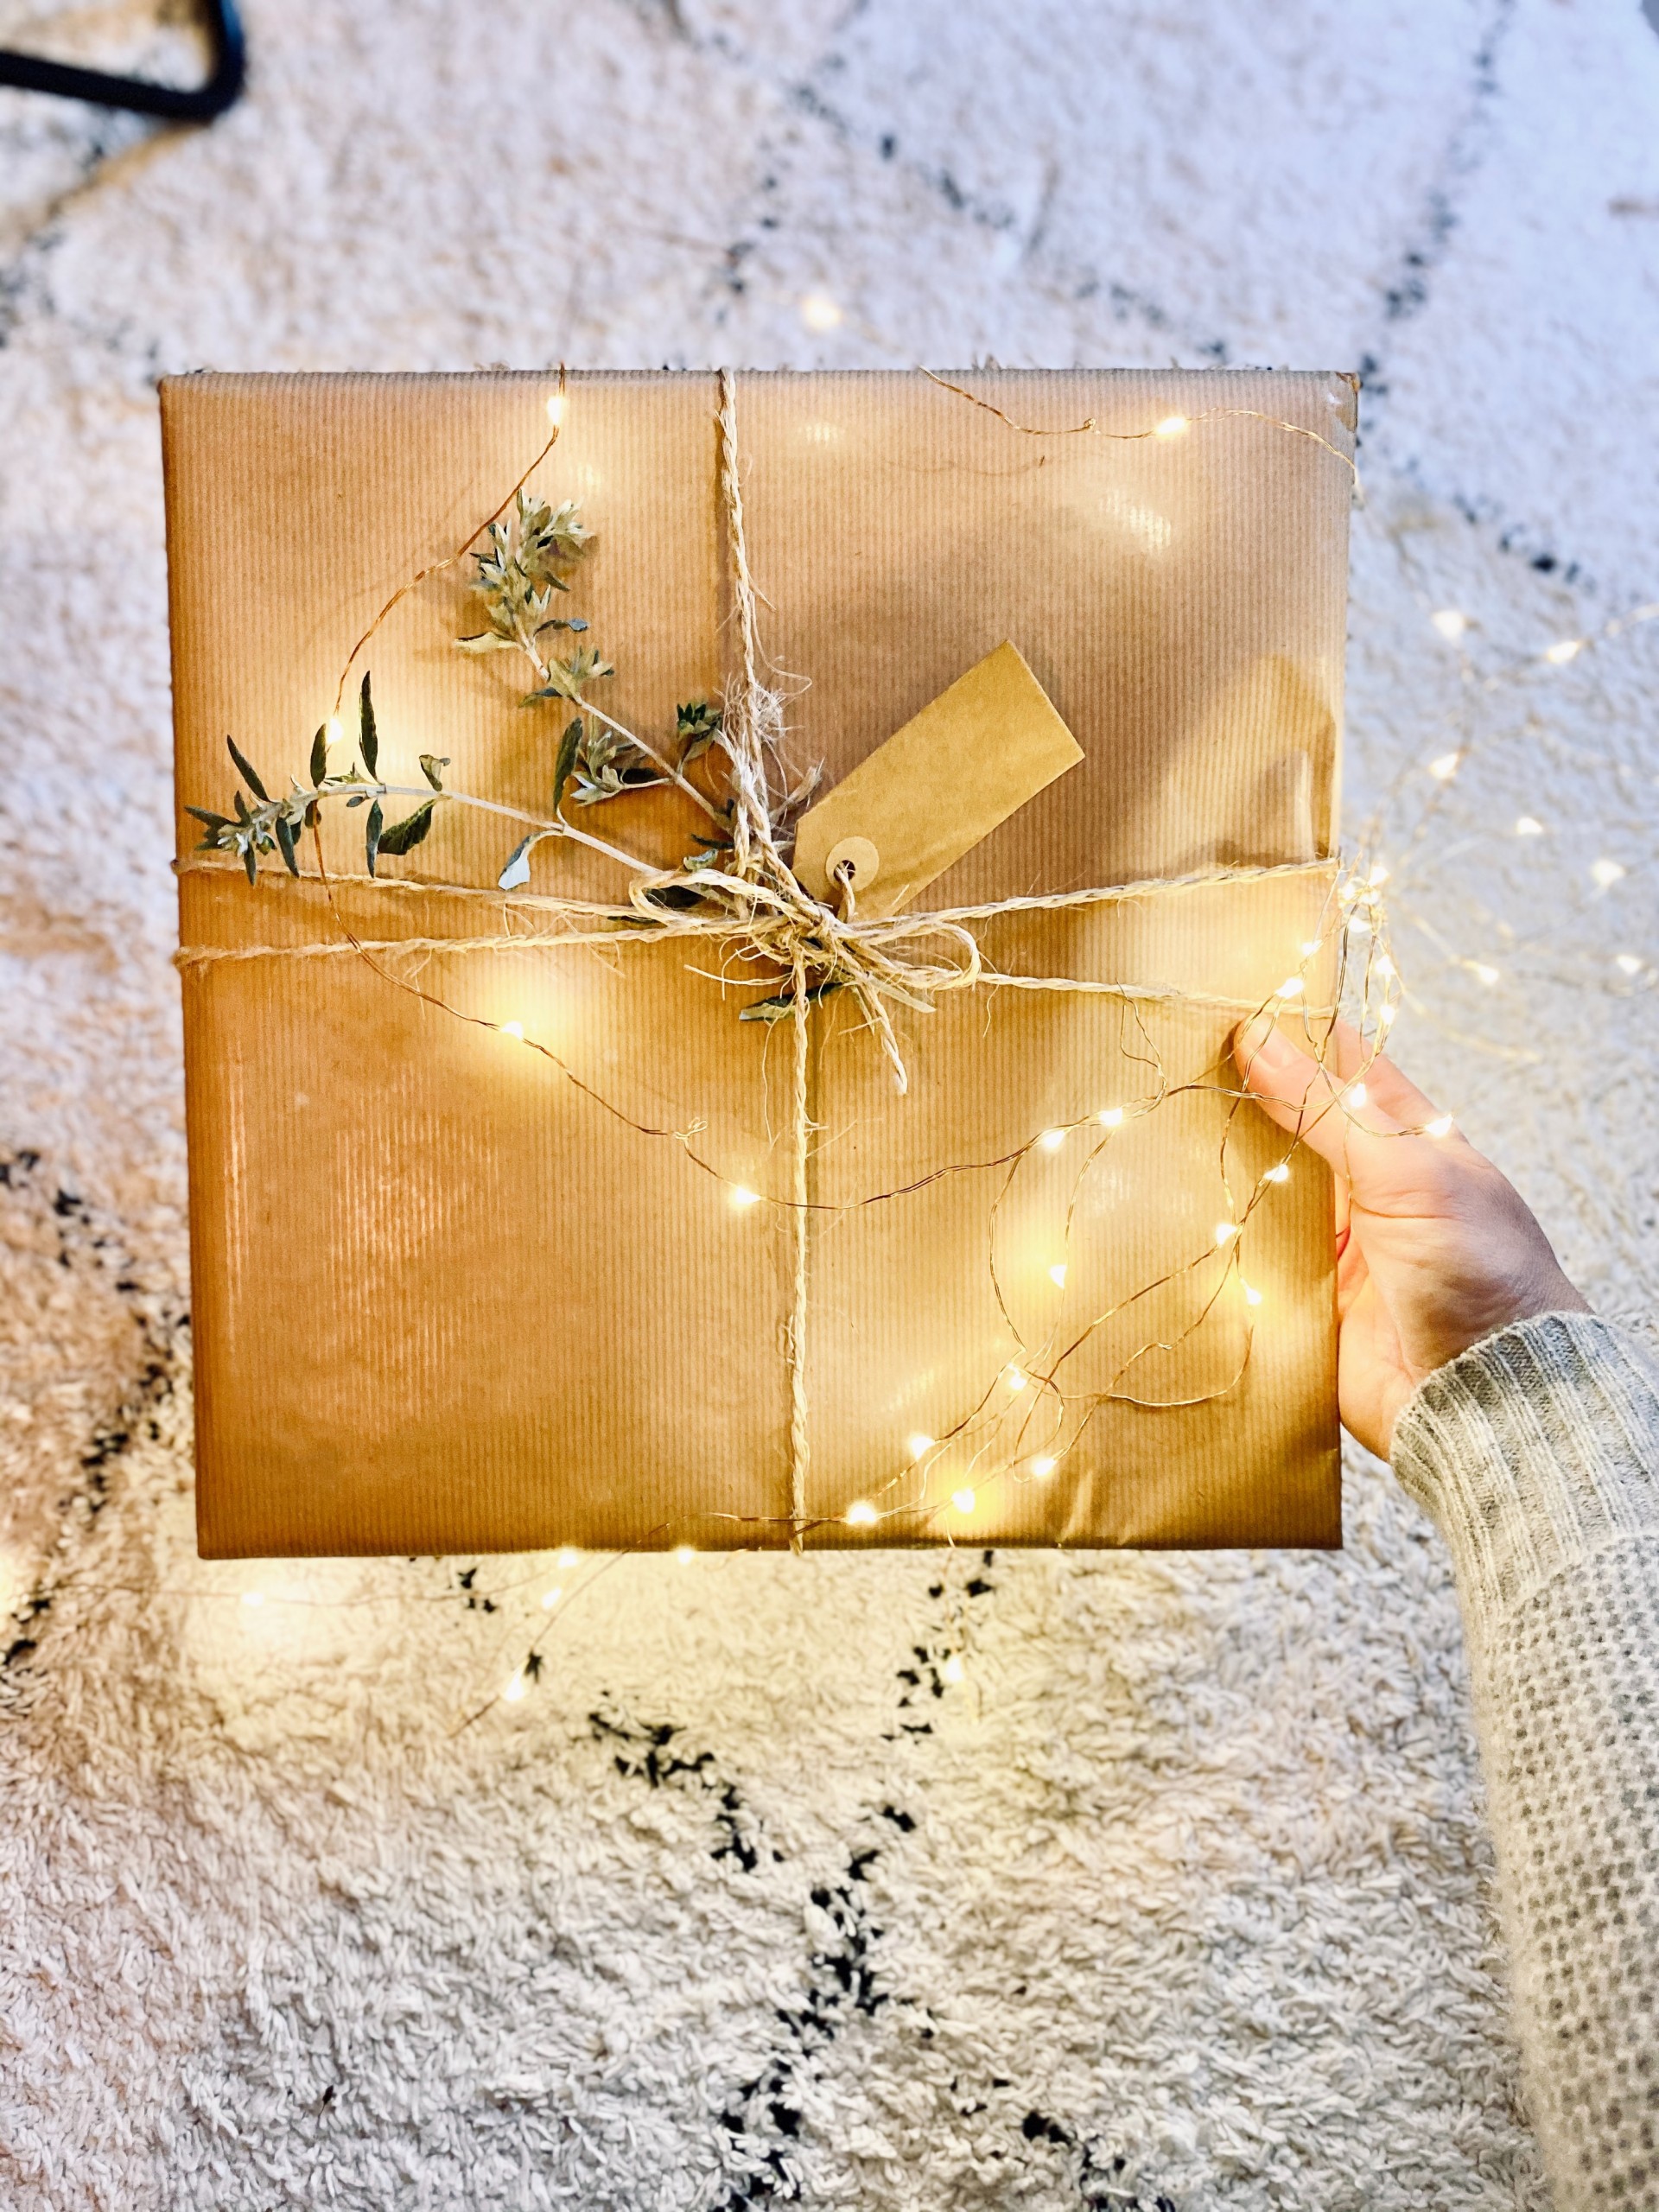 How To Give Gifts On A Budget